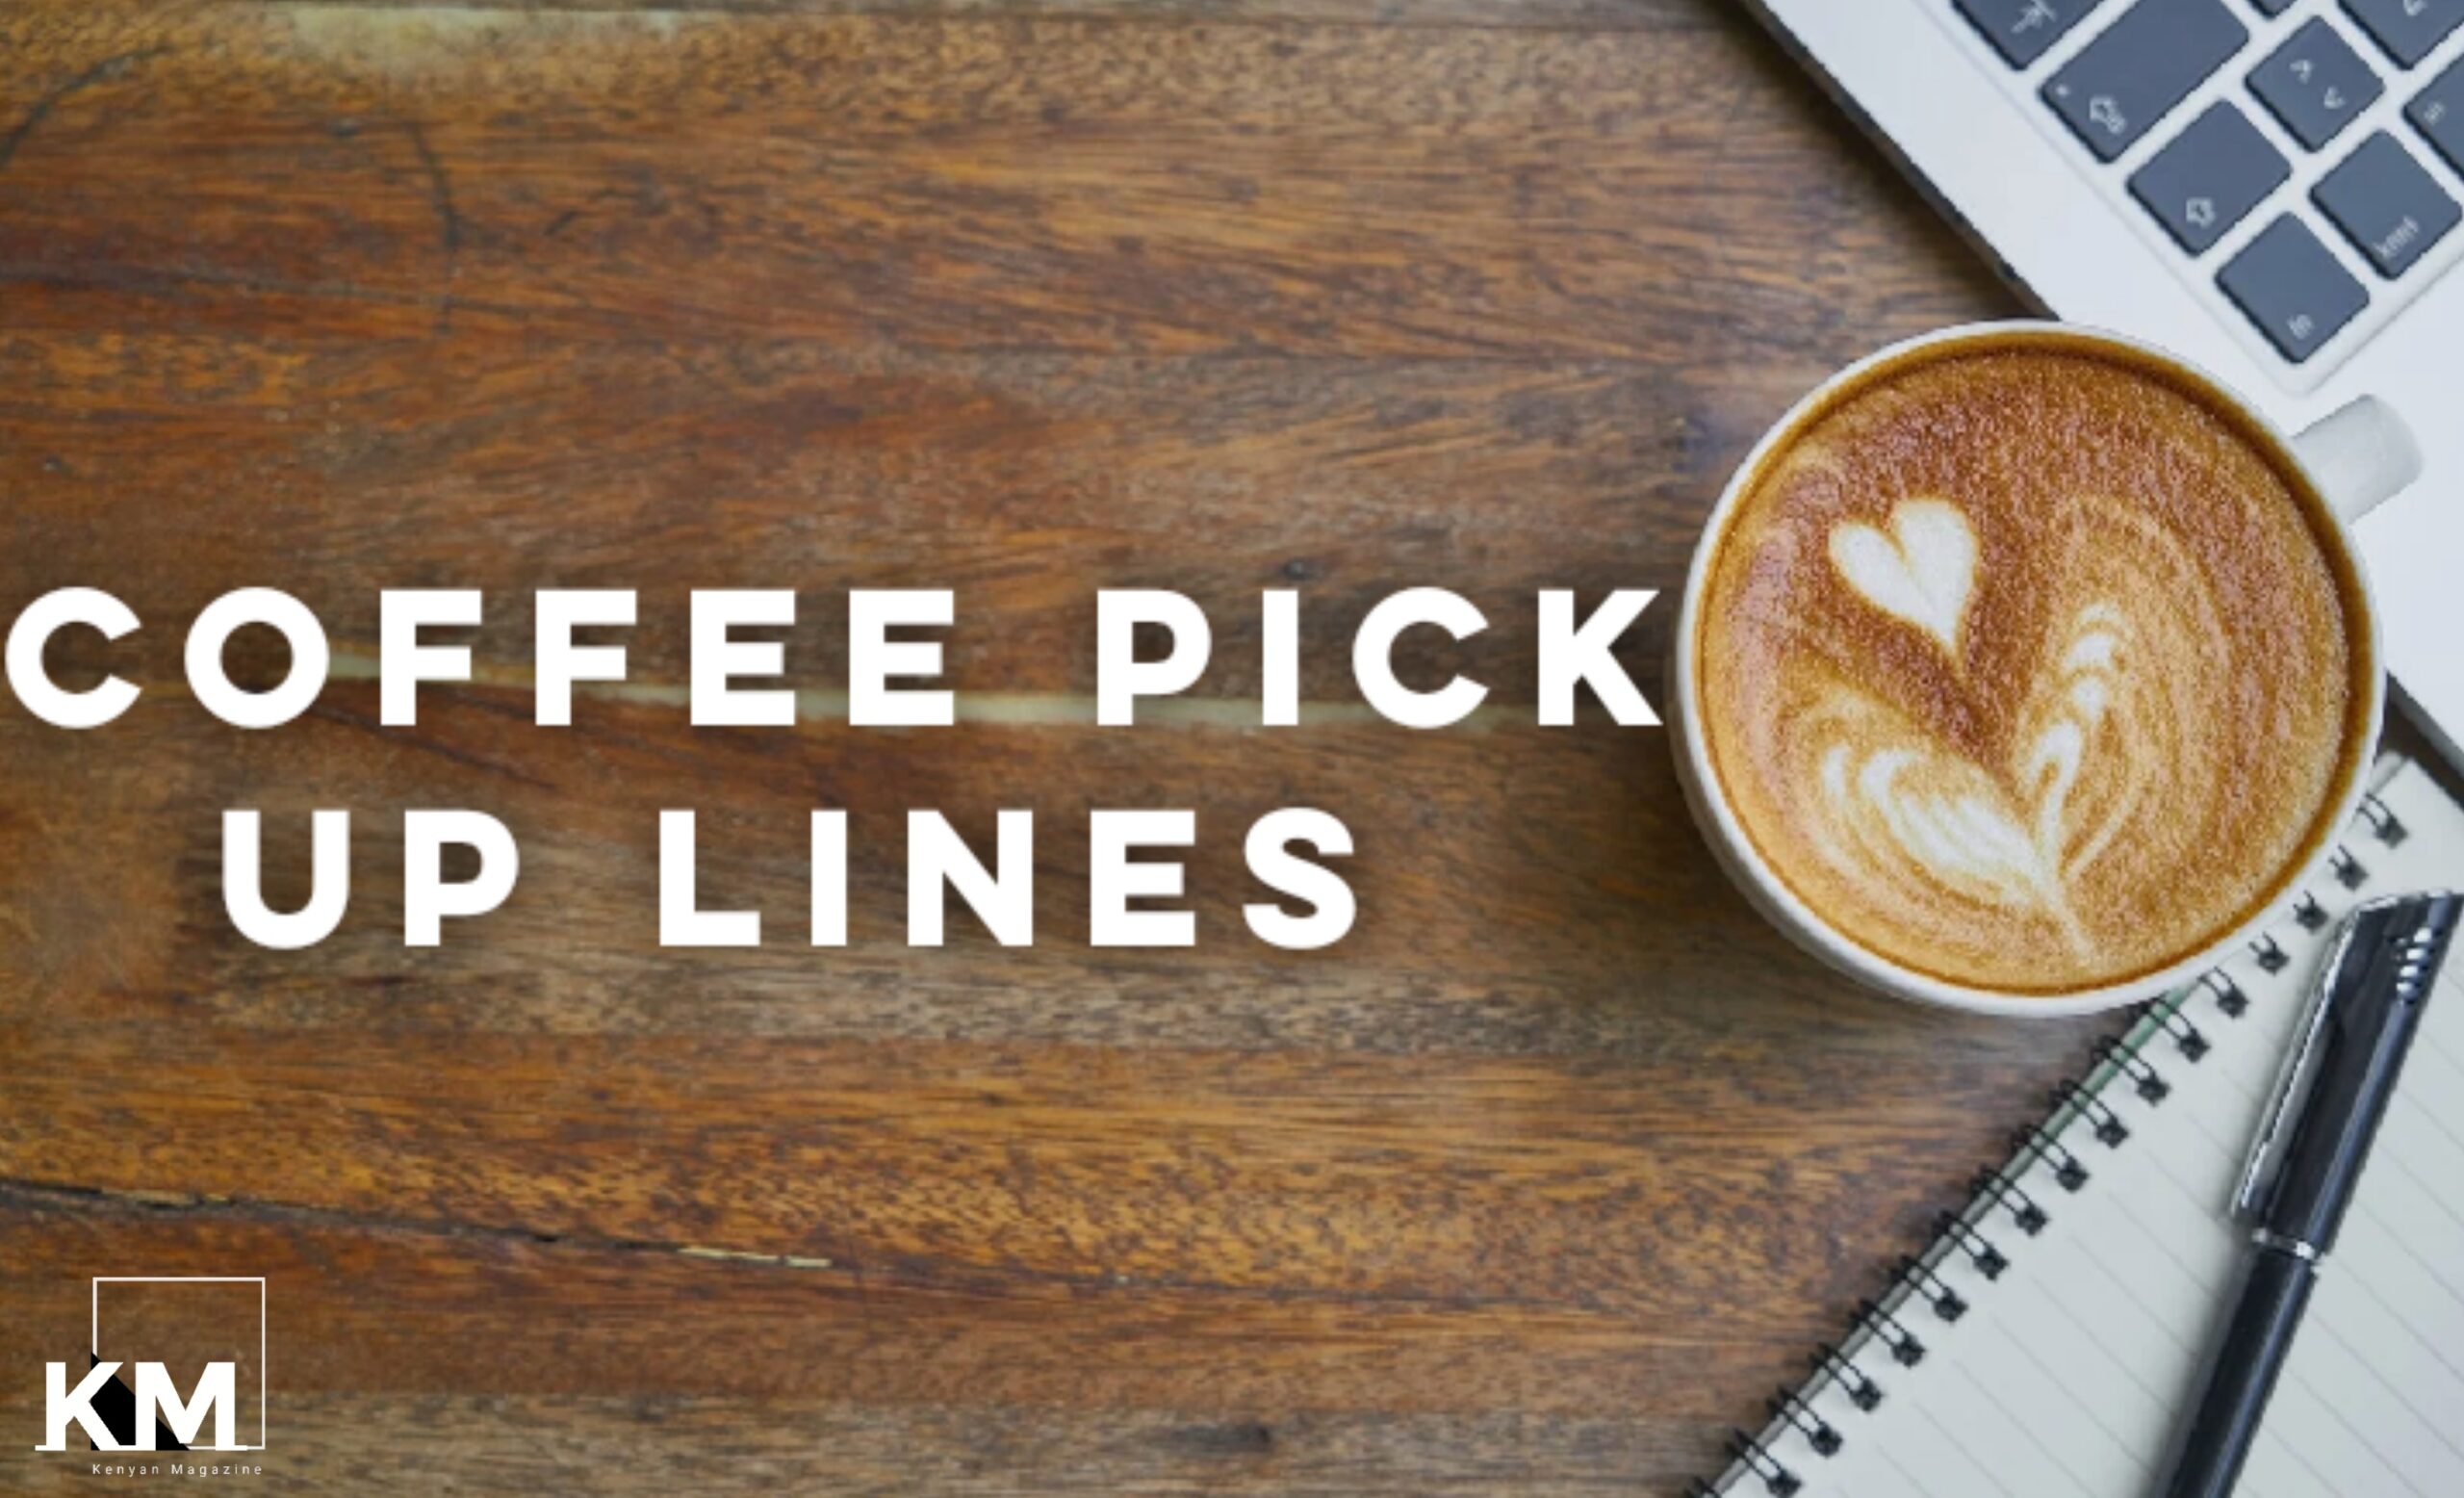 Coffee pick up lines